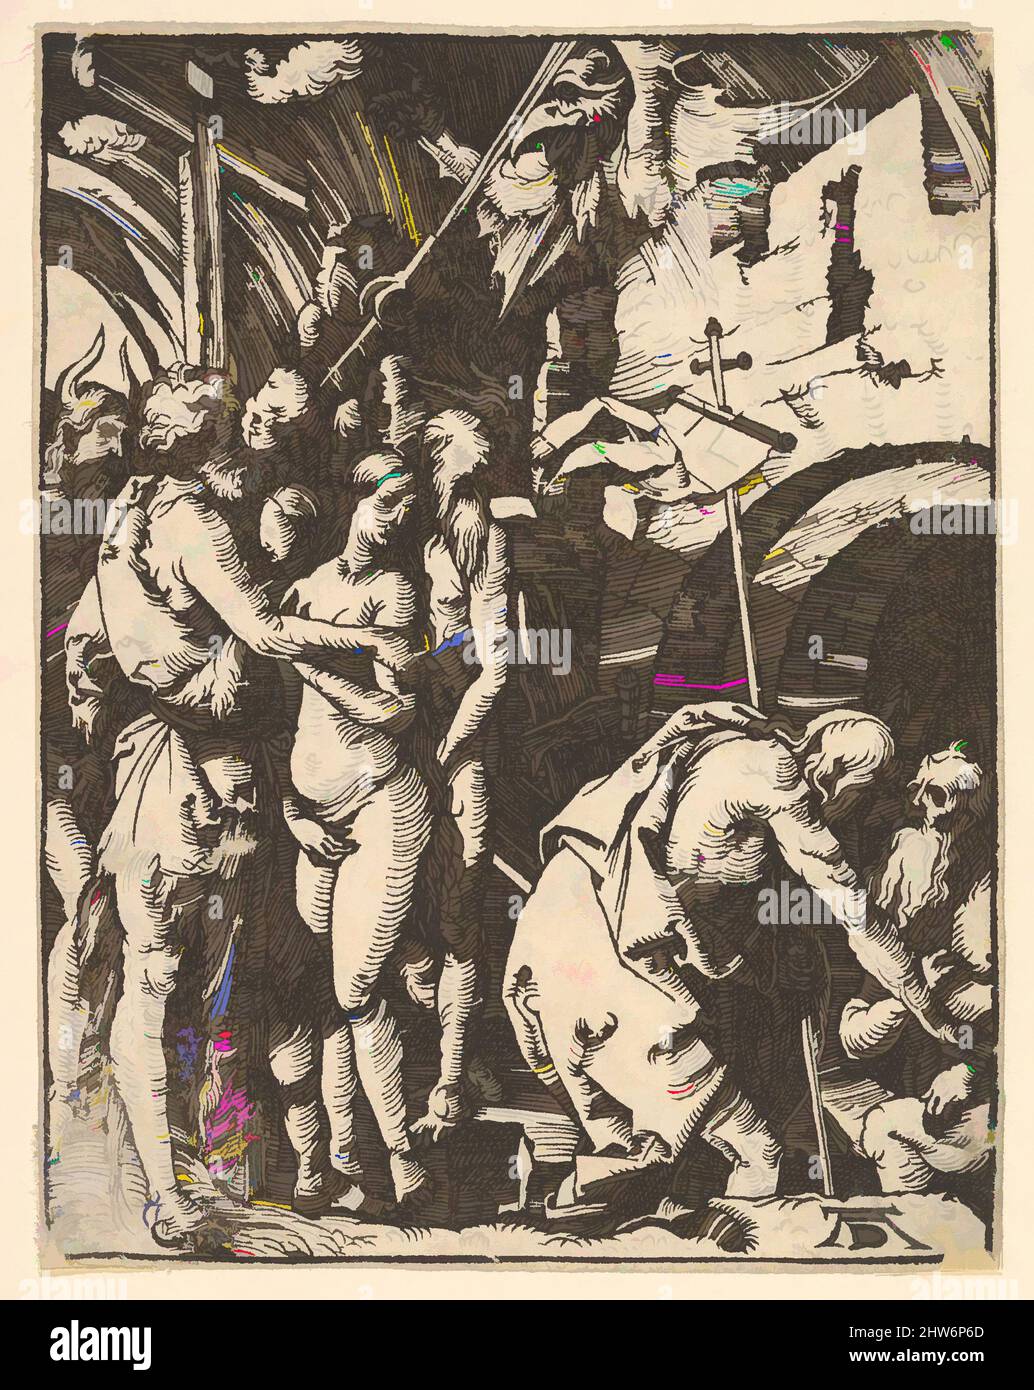 Art inspired by Christ in Limbo, from The Little Passion, (copy), n.d., Woodcut from a series of 19 prints, Prints, After Albrecht Dürer (German, Nuremberg 1471–1528 Nuremberg), Johannes Mommaert, Classic works modernized by Artotop with a splash of modernity. Shapes, color and value, eye-catching visual impact on art. Emotions through freedom of artworks in a contemporary way. A timeless message pursuing a wildly creative new direction. Artists turning to the digital medium and creating the Artotop NFT Stock Photo